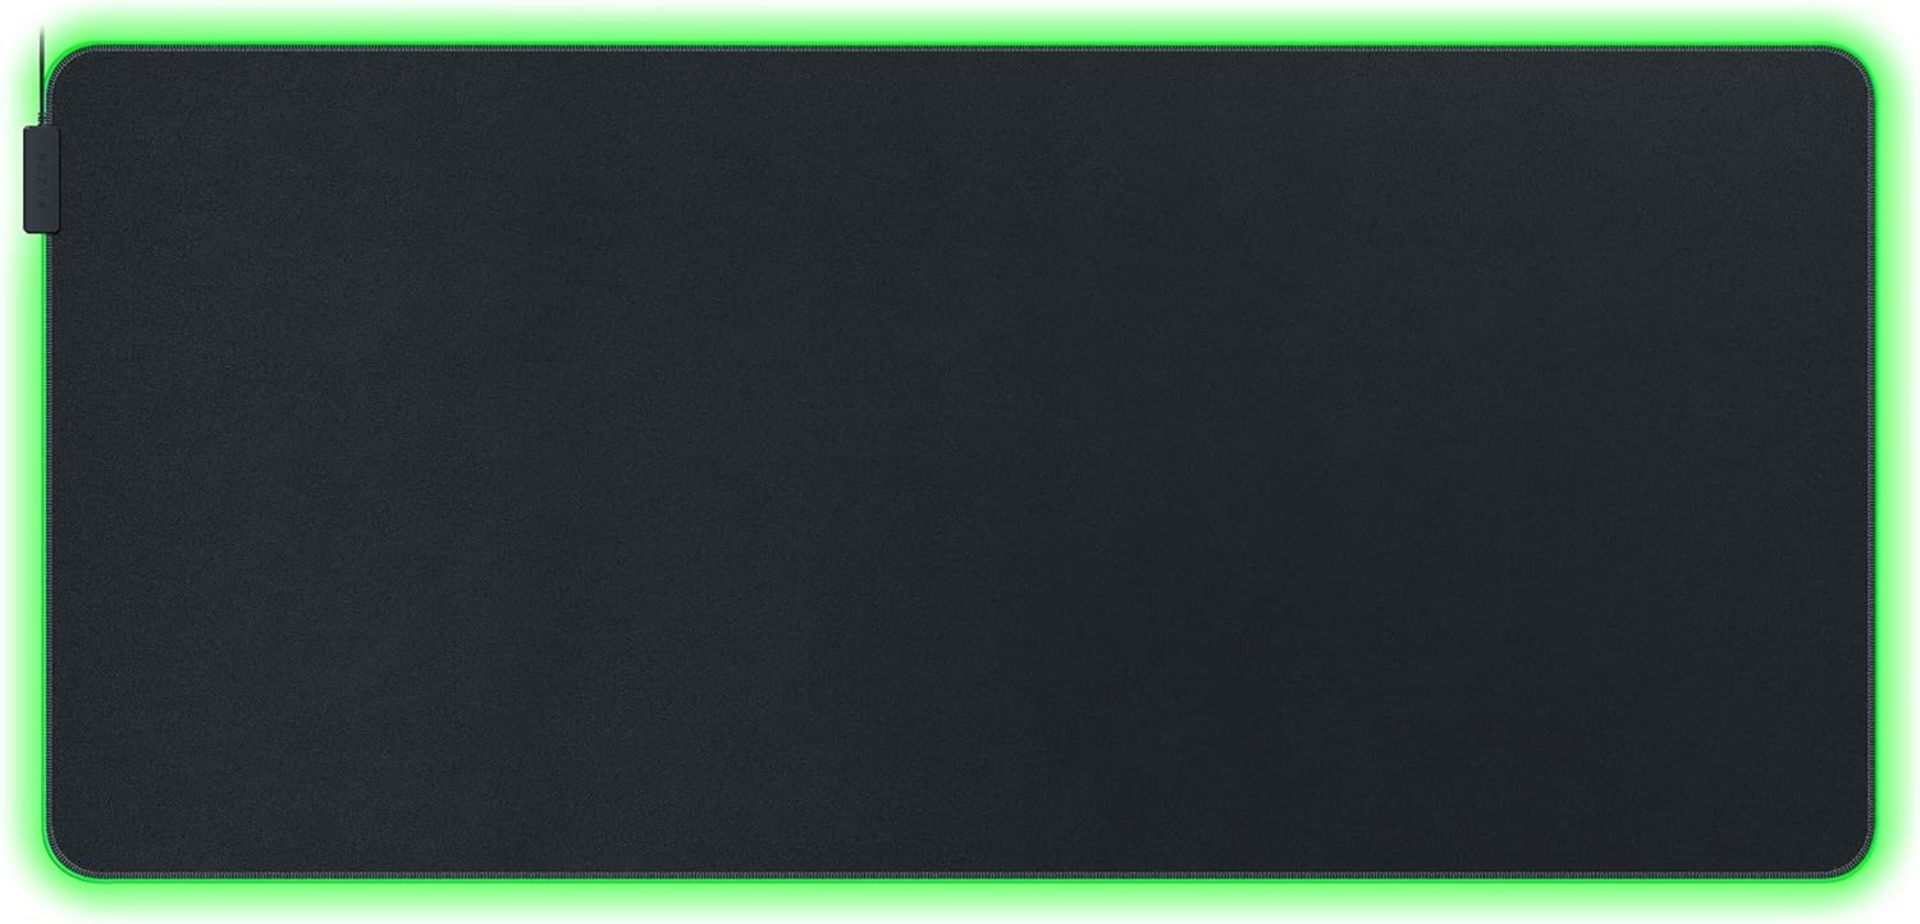 NEW & BOXED RAZER Goliathus Chroma 3XL Soft Gaming Mouse Mat. RRP £126.99. Micro-Textured Cloth - Image 7 of 8